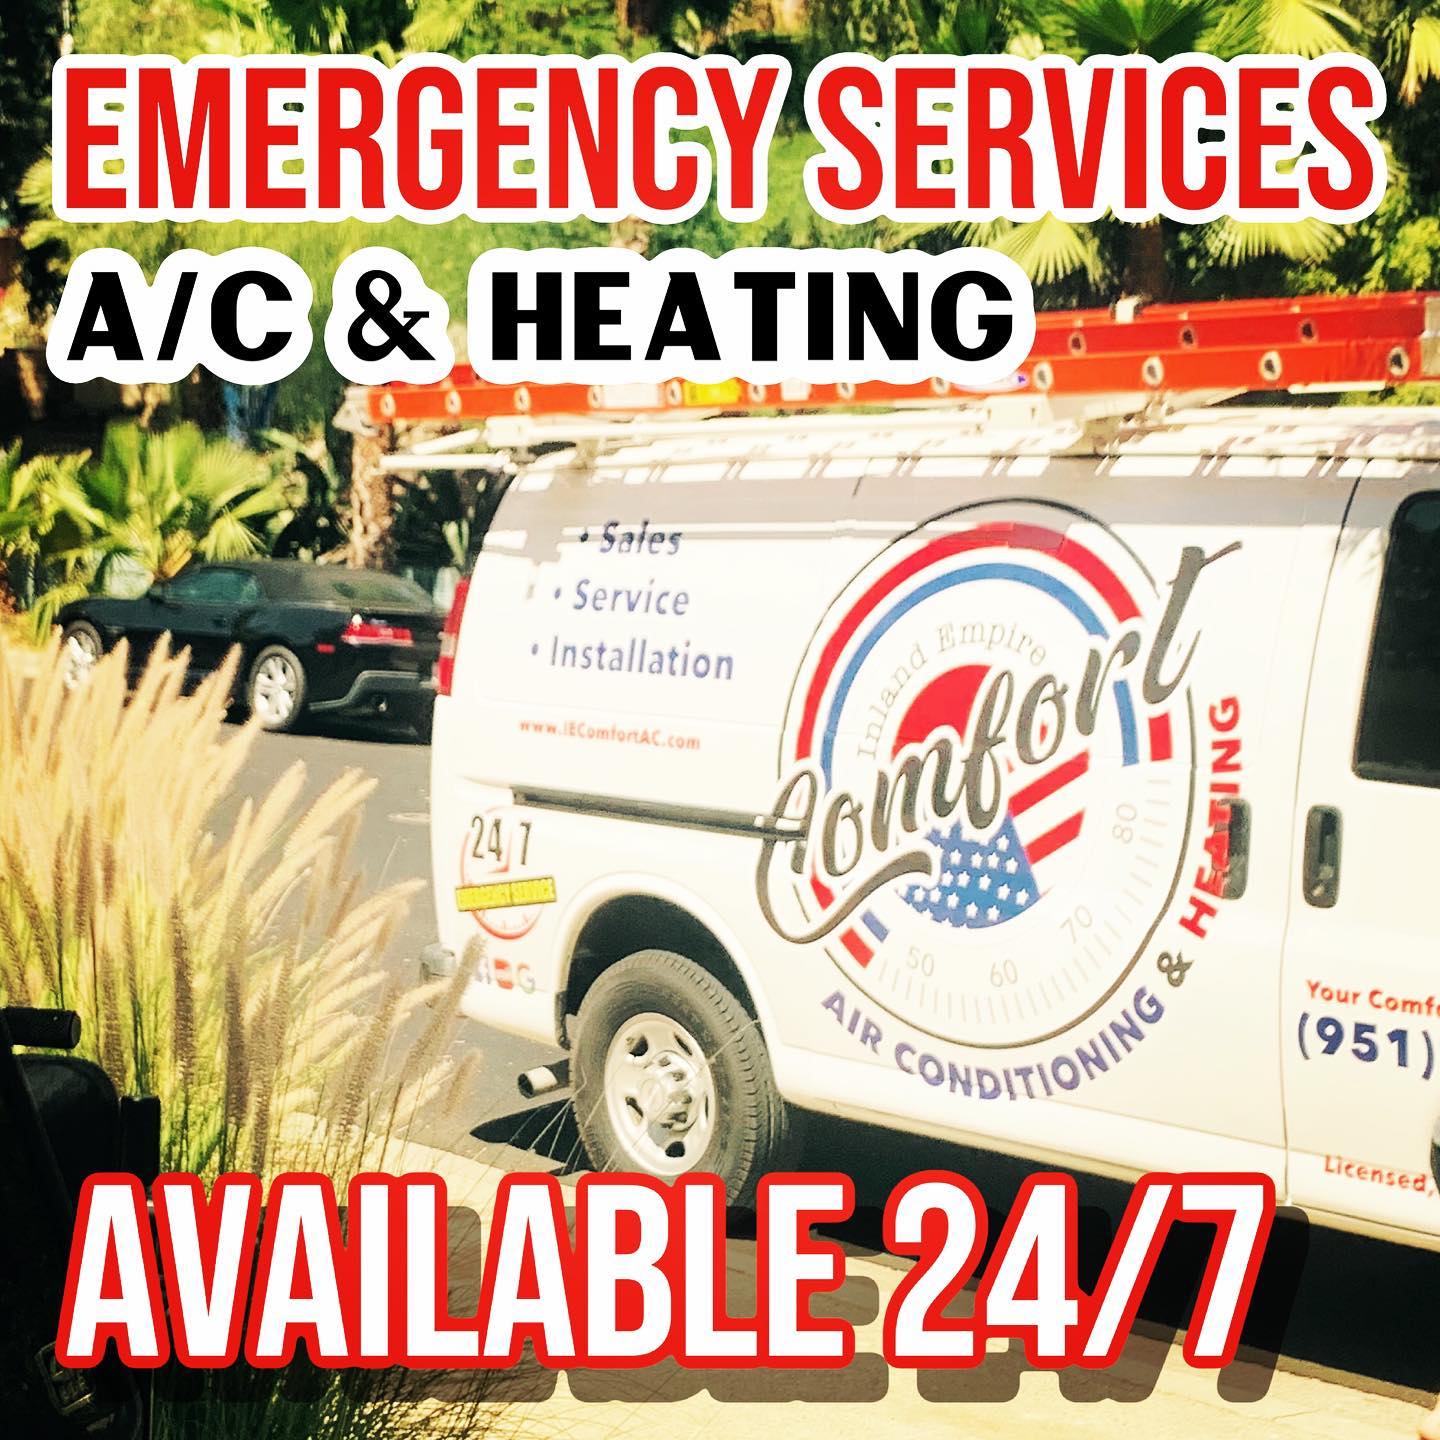 HVAC Company in Riverside County, CA - Complete Comfort Air